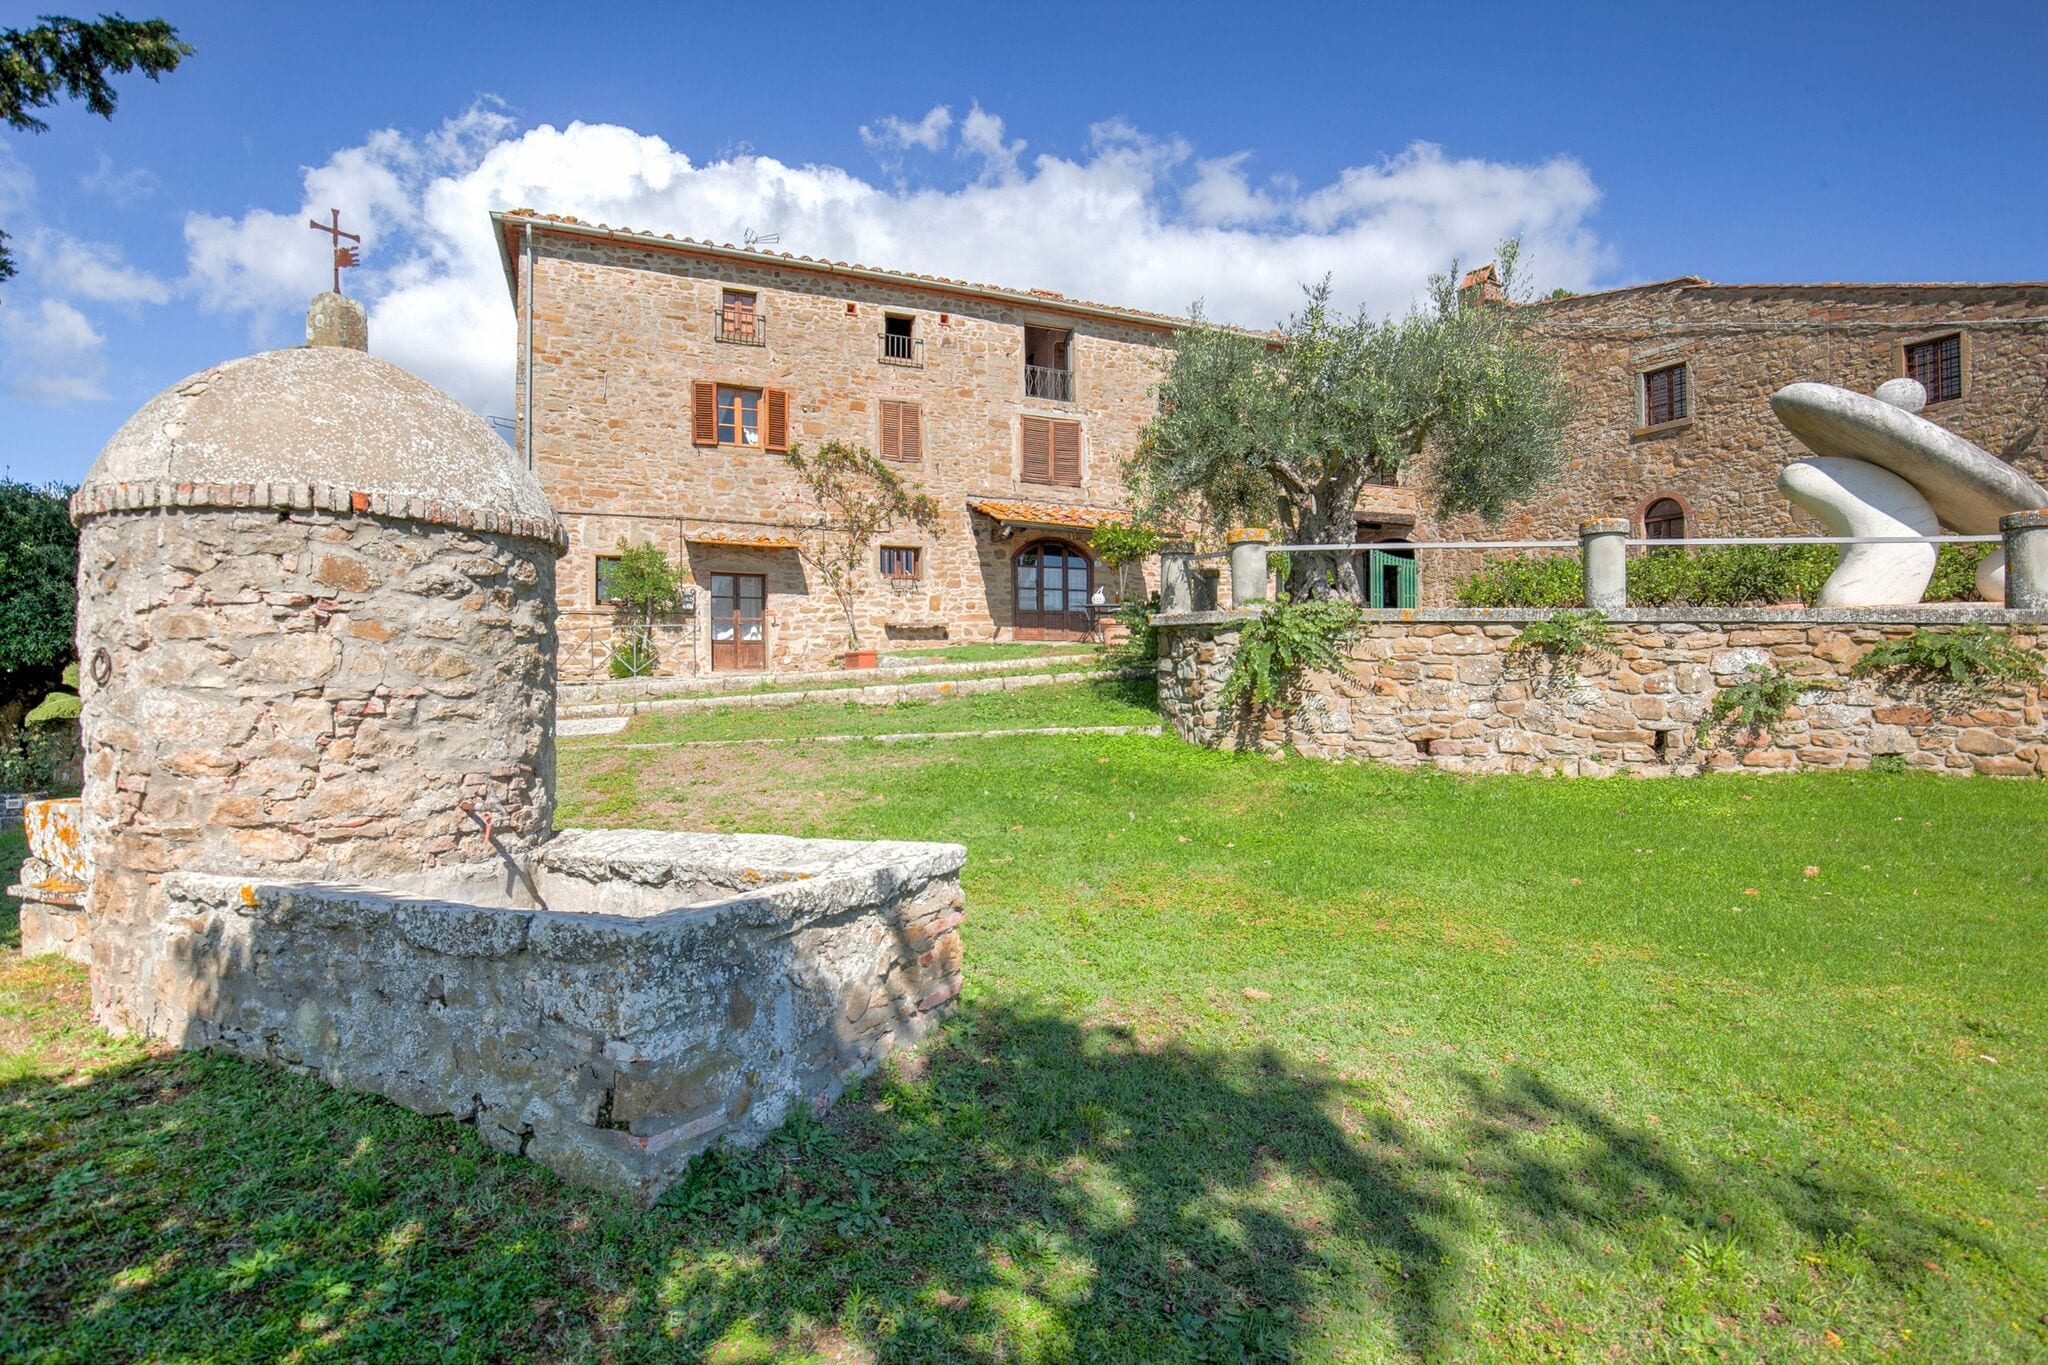 A beautiful, traditional Tuscan hamlet in the hills.

